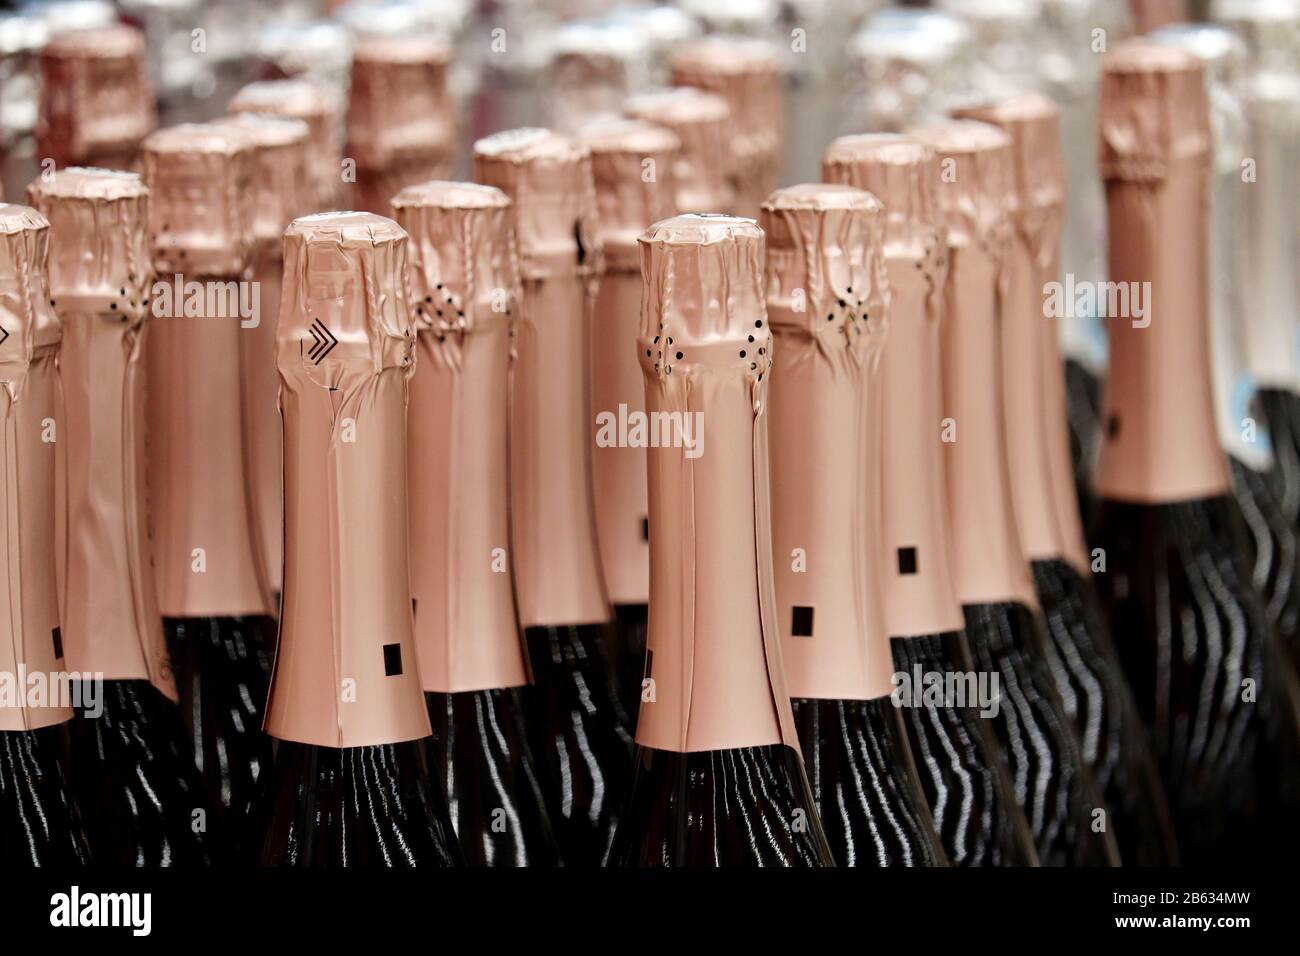 Champagne bottles in a row, selective focus. Liquor store, sparkling wine production concept Stock Photo